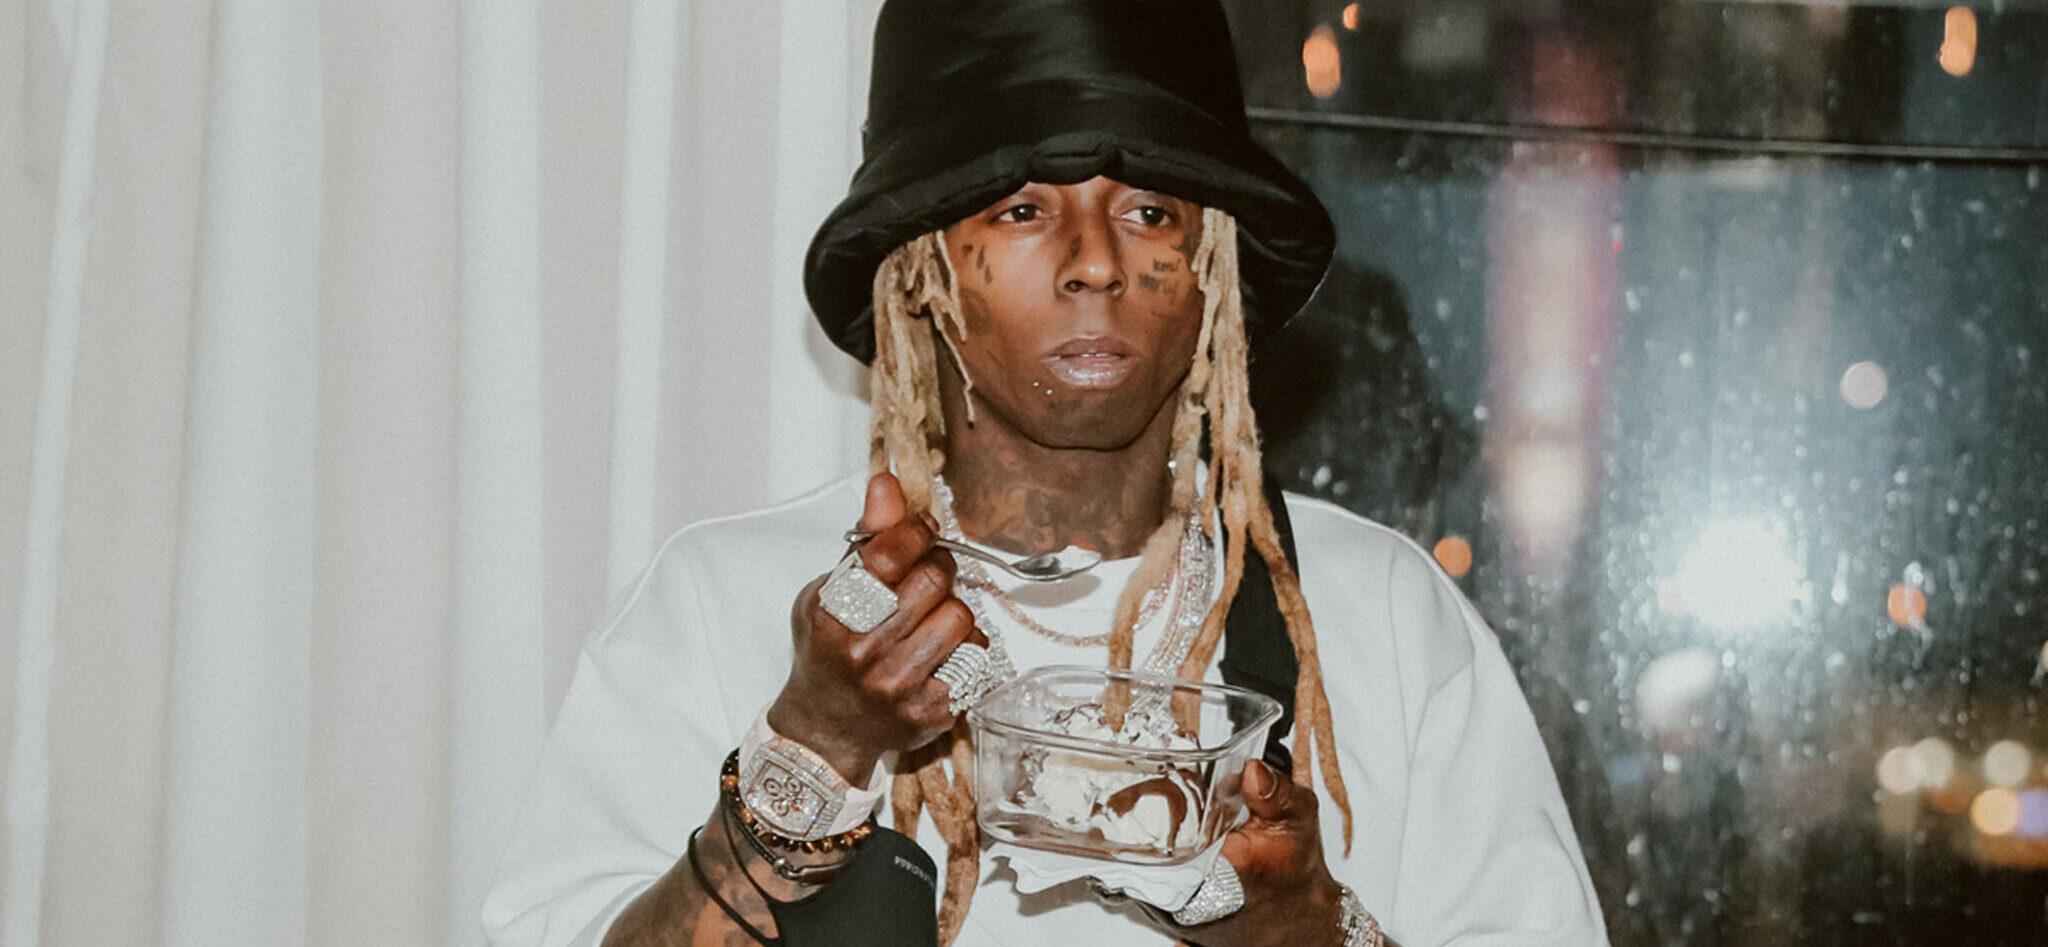 Winnie Harlow and Lil Wayne party together as they join 2 Chainz and Trey Songz at Saadiq by Made Nightlife